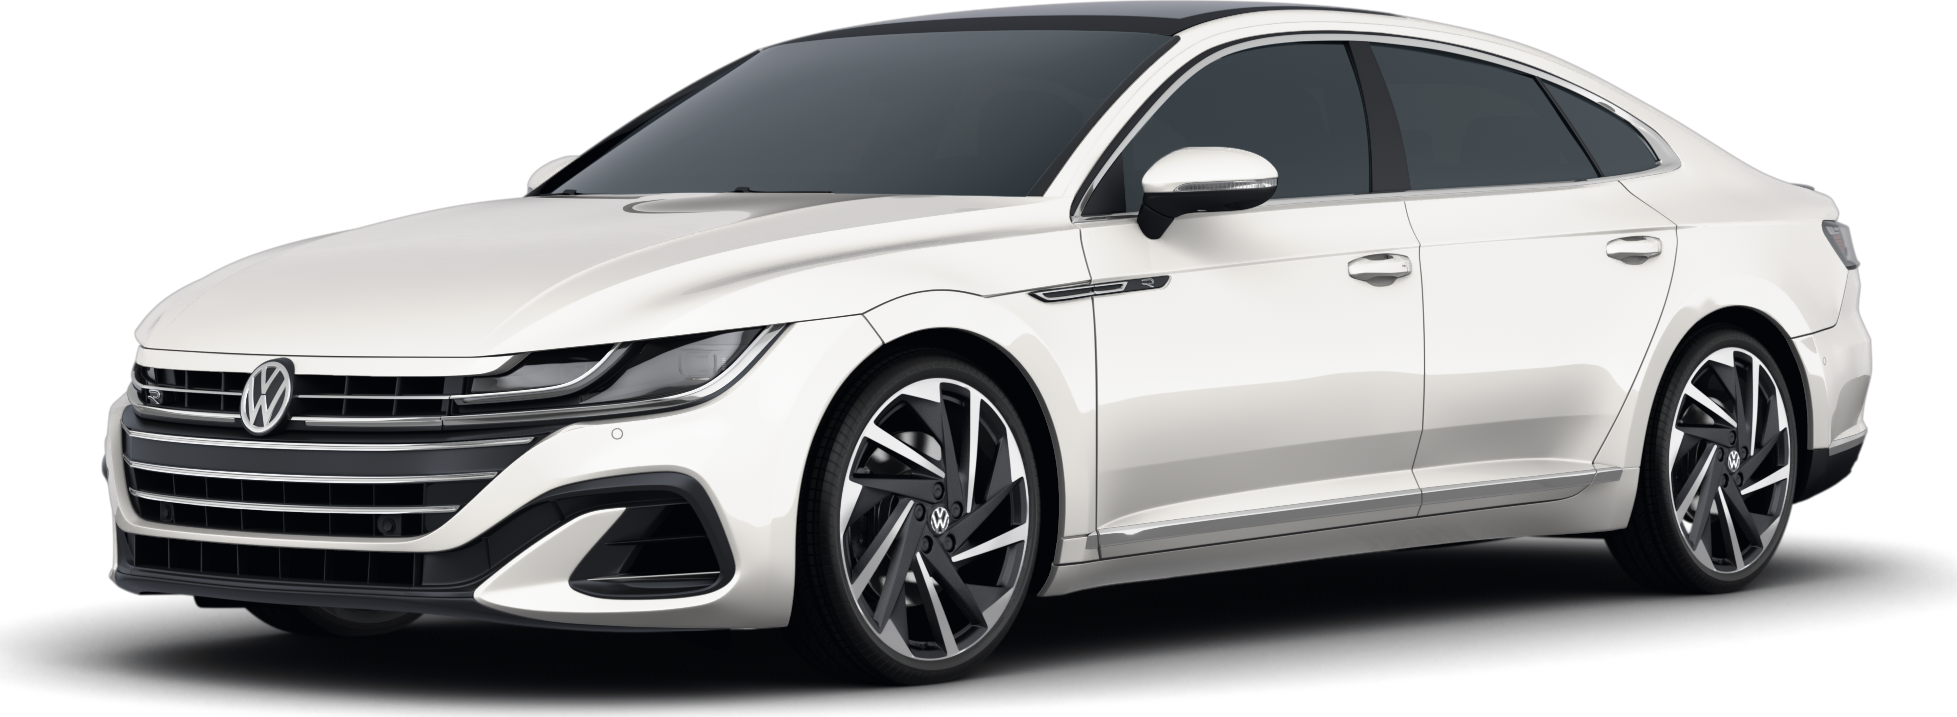 Comparing the VW Golf GTI and VW Arteon